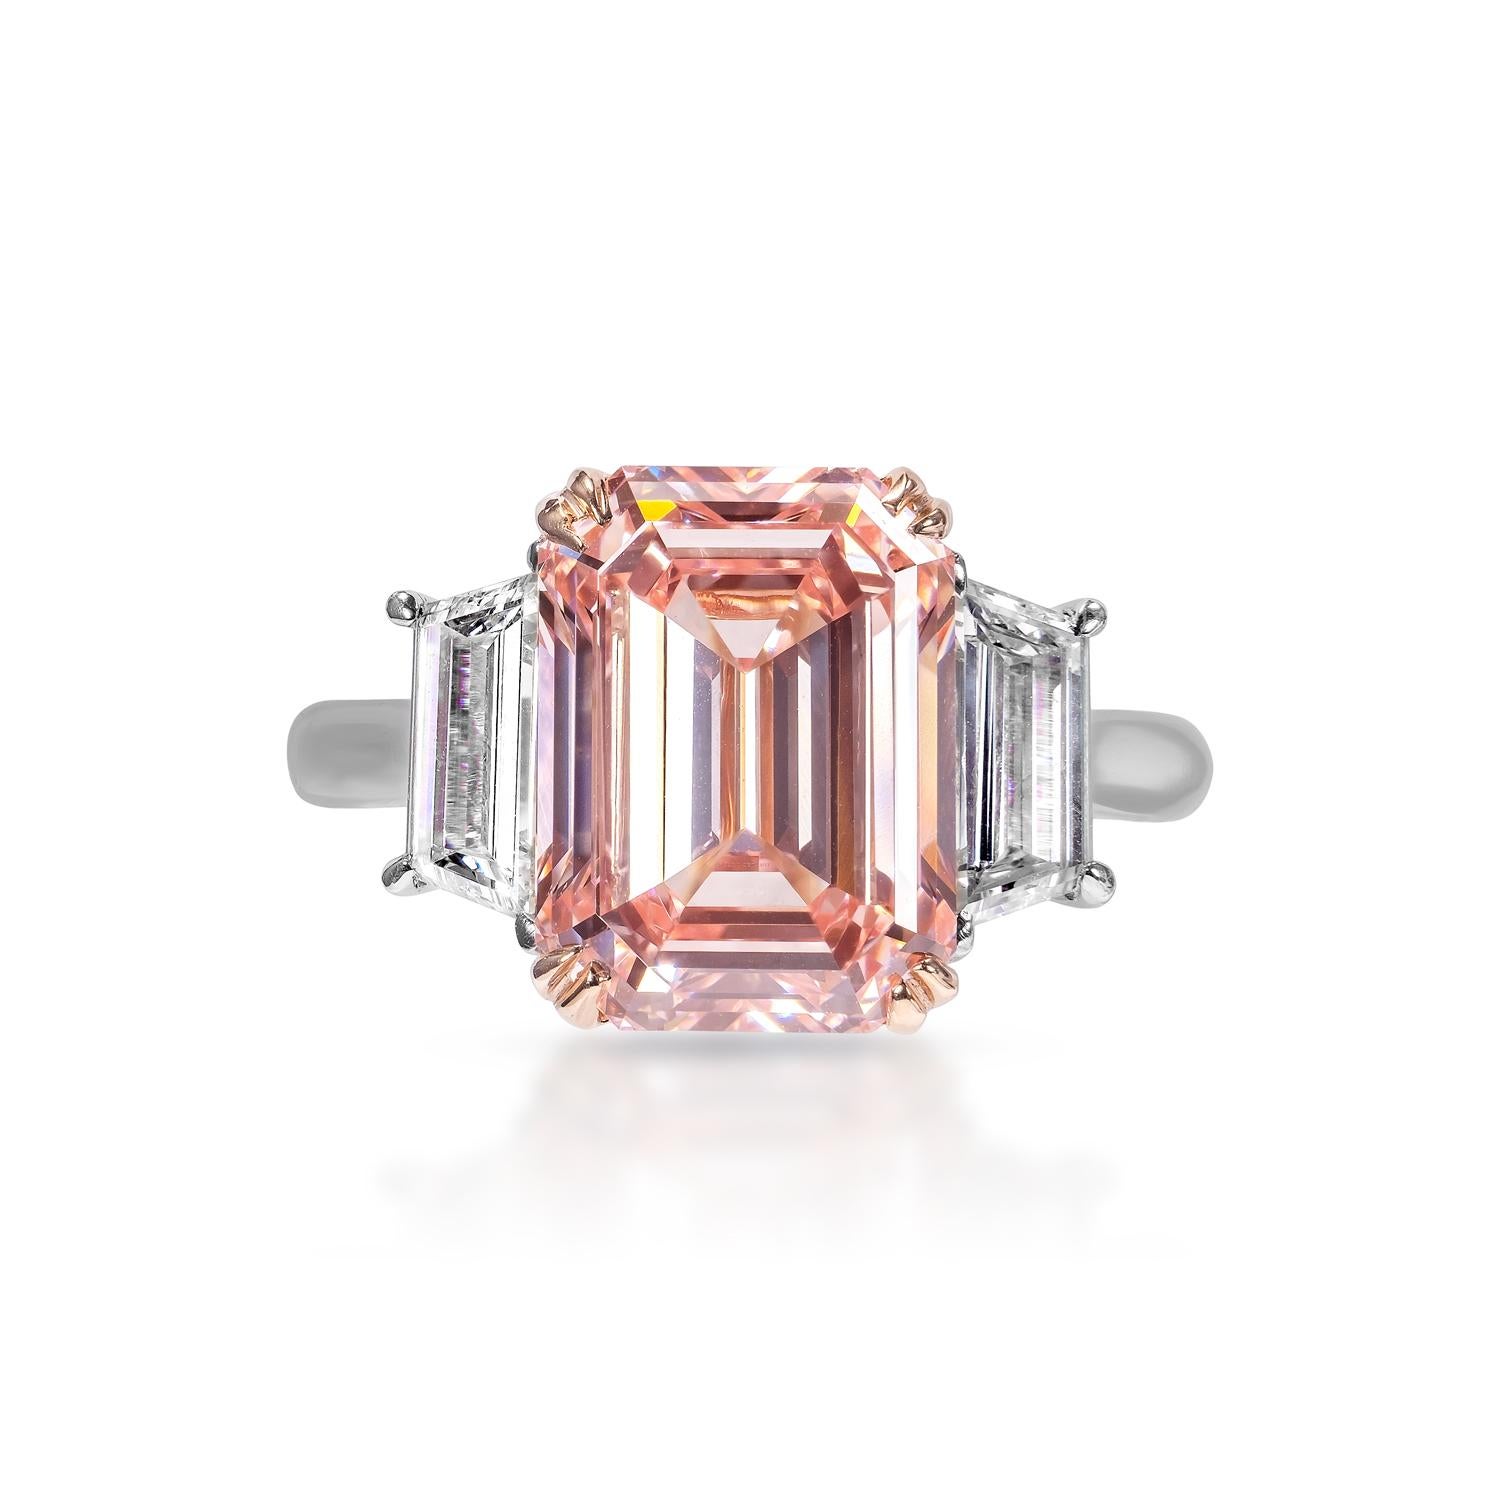 GIA Certified

Earth Mined Center Diamond:
Carat Weight: 5.50 Carats
Color: fancy vivid pink *
Clarity: VVS2
Style: Emerald Cut
*This Diamond has been treated by one or more processes to change its color

Carat Weight: 1.17 Carats
Shape: Trapezoid 